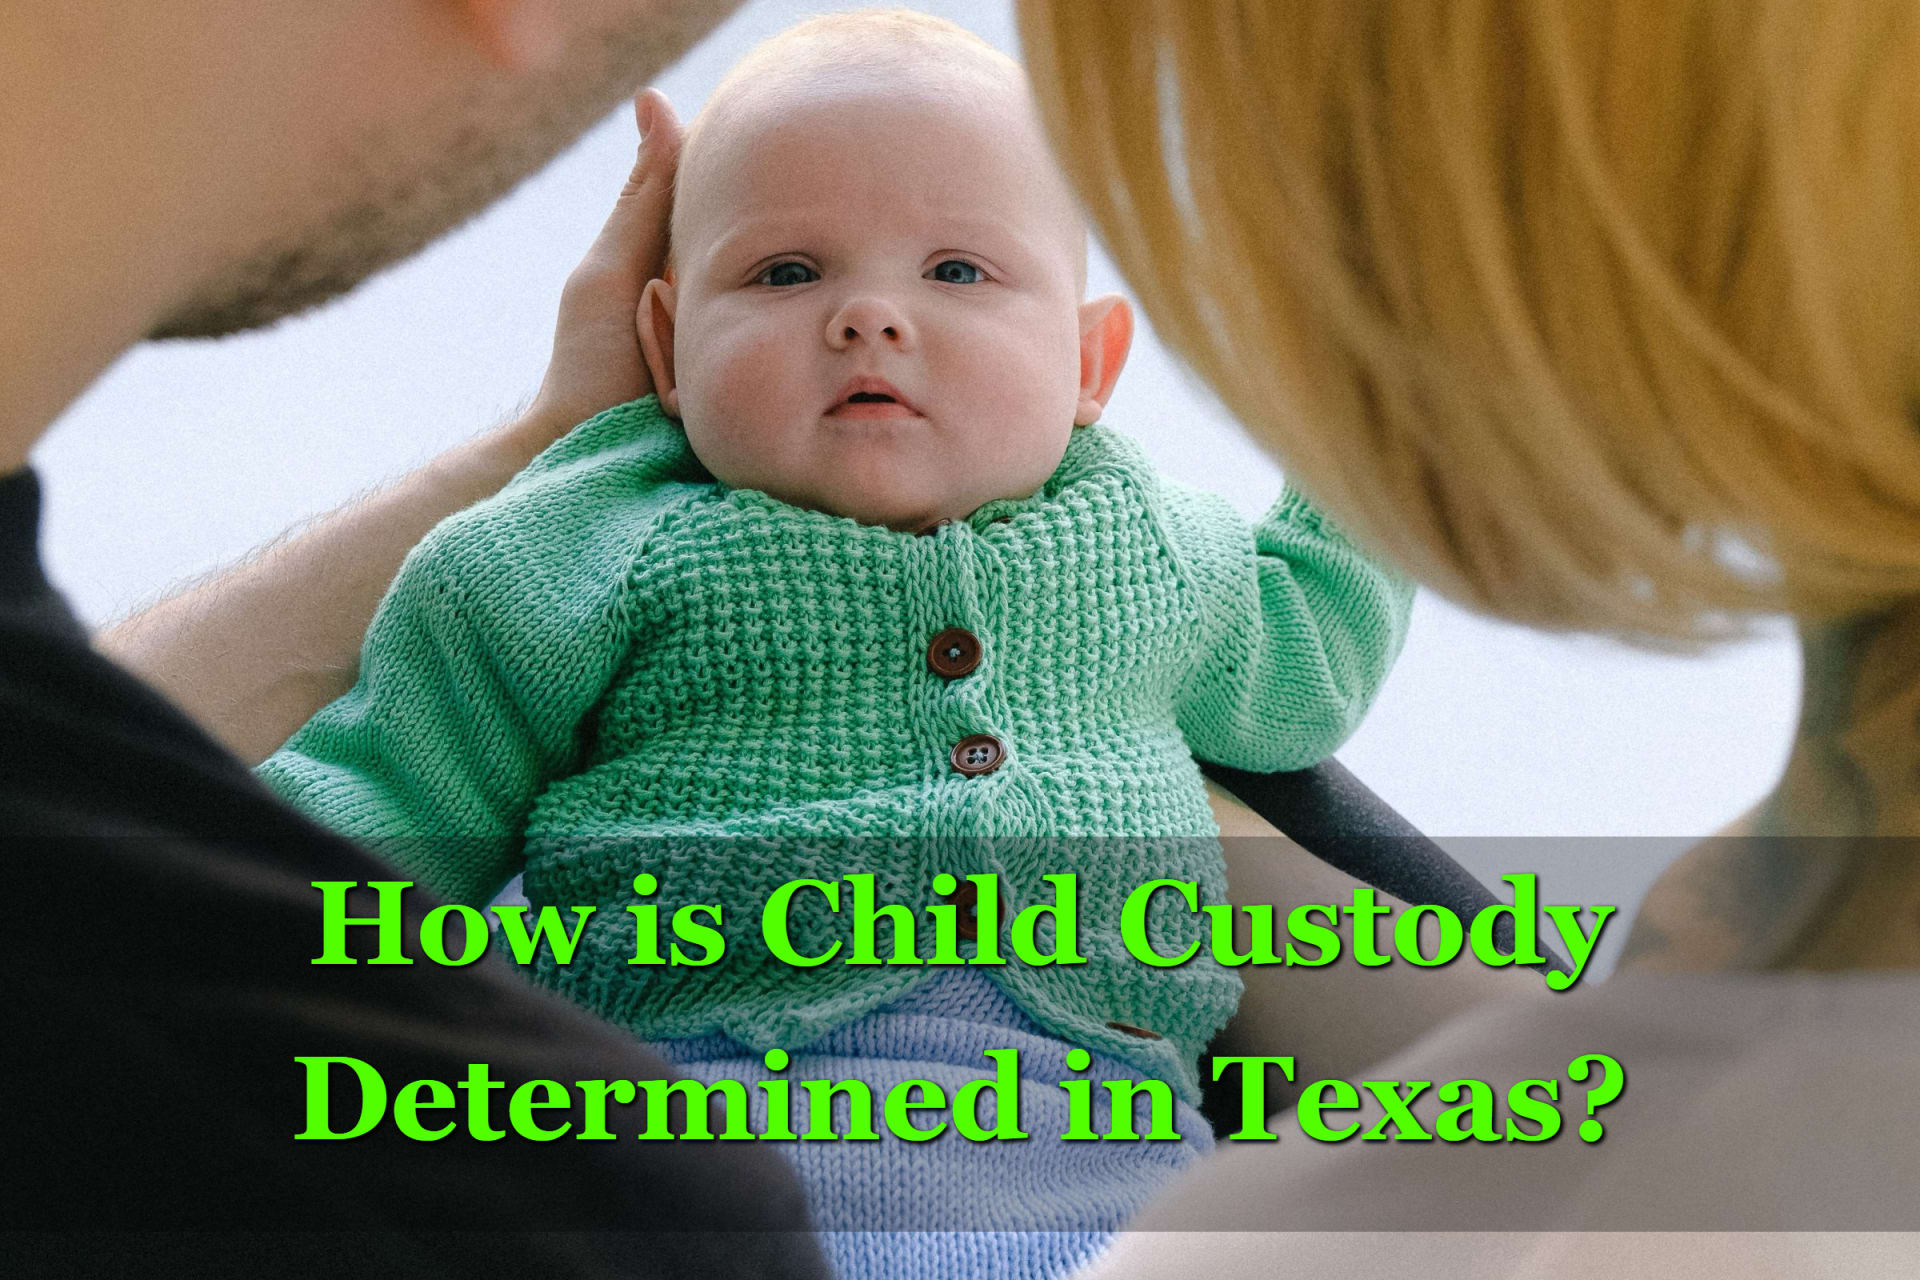 How is Child Custody Determined in Texas?